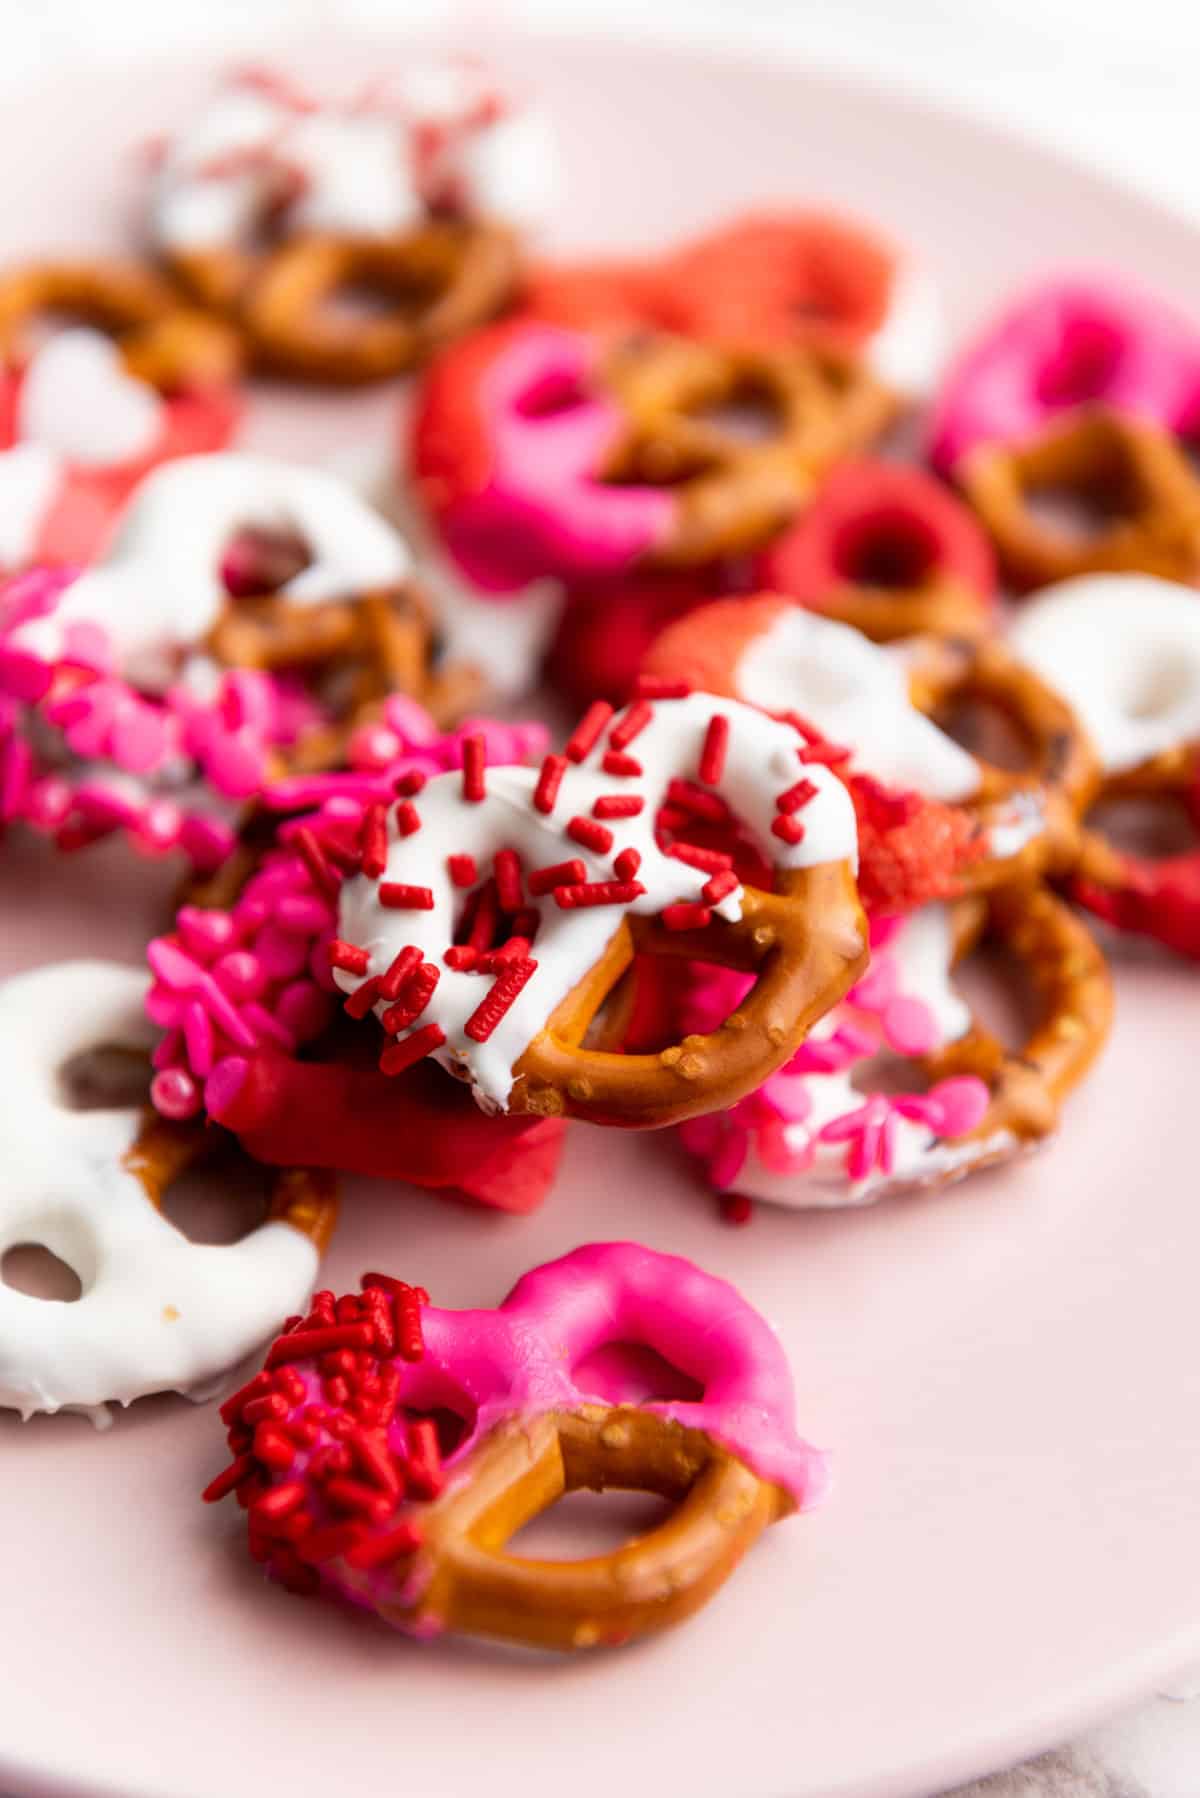 A close up of chocolate coated pretzels for Valentine's Day.